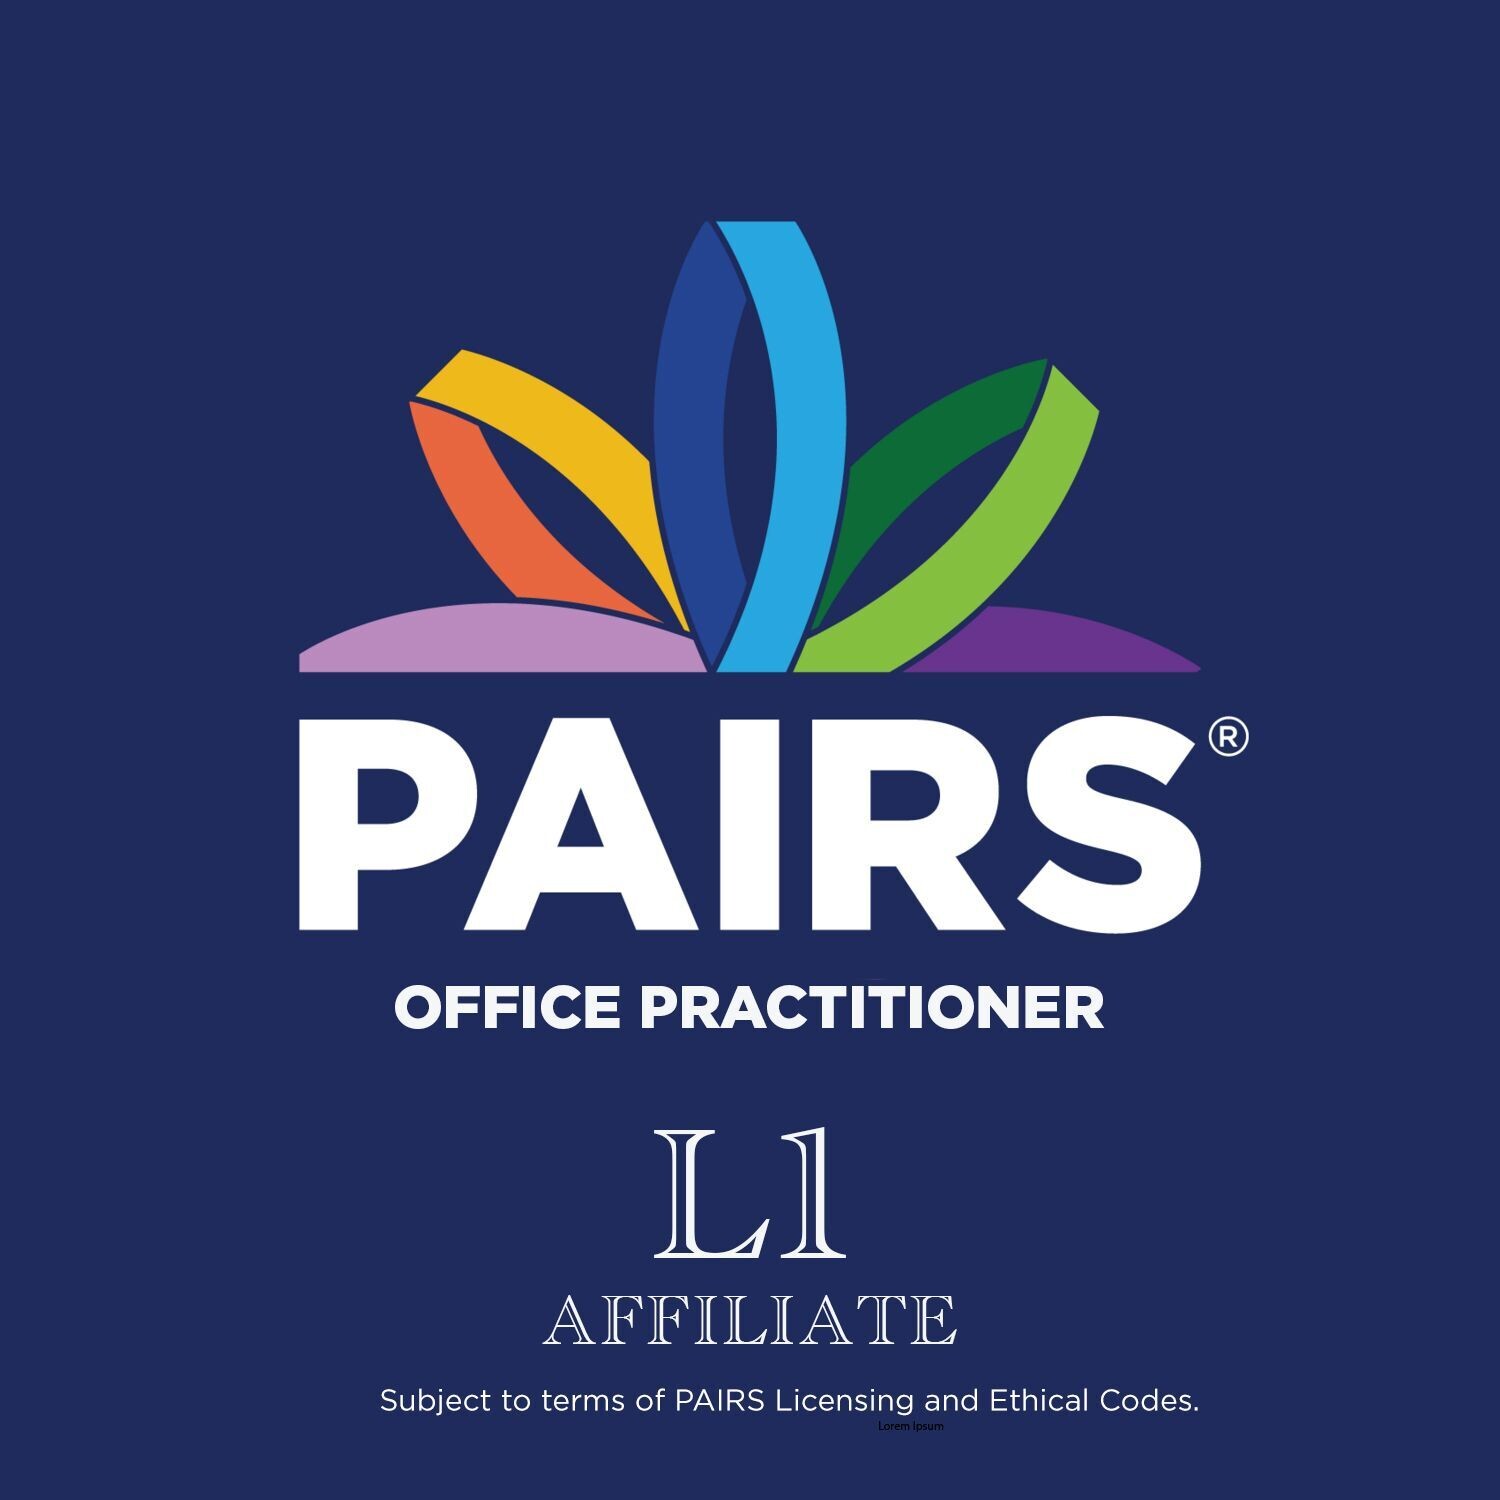 Office PAIRS Practitioner Annual Renewal